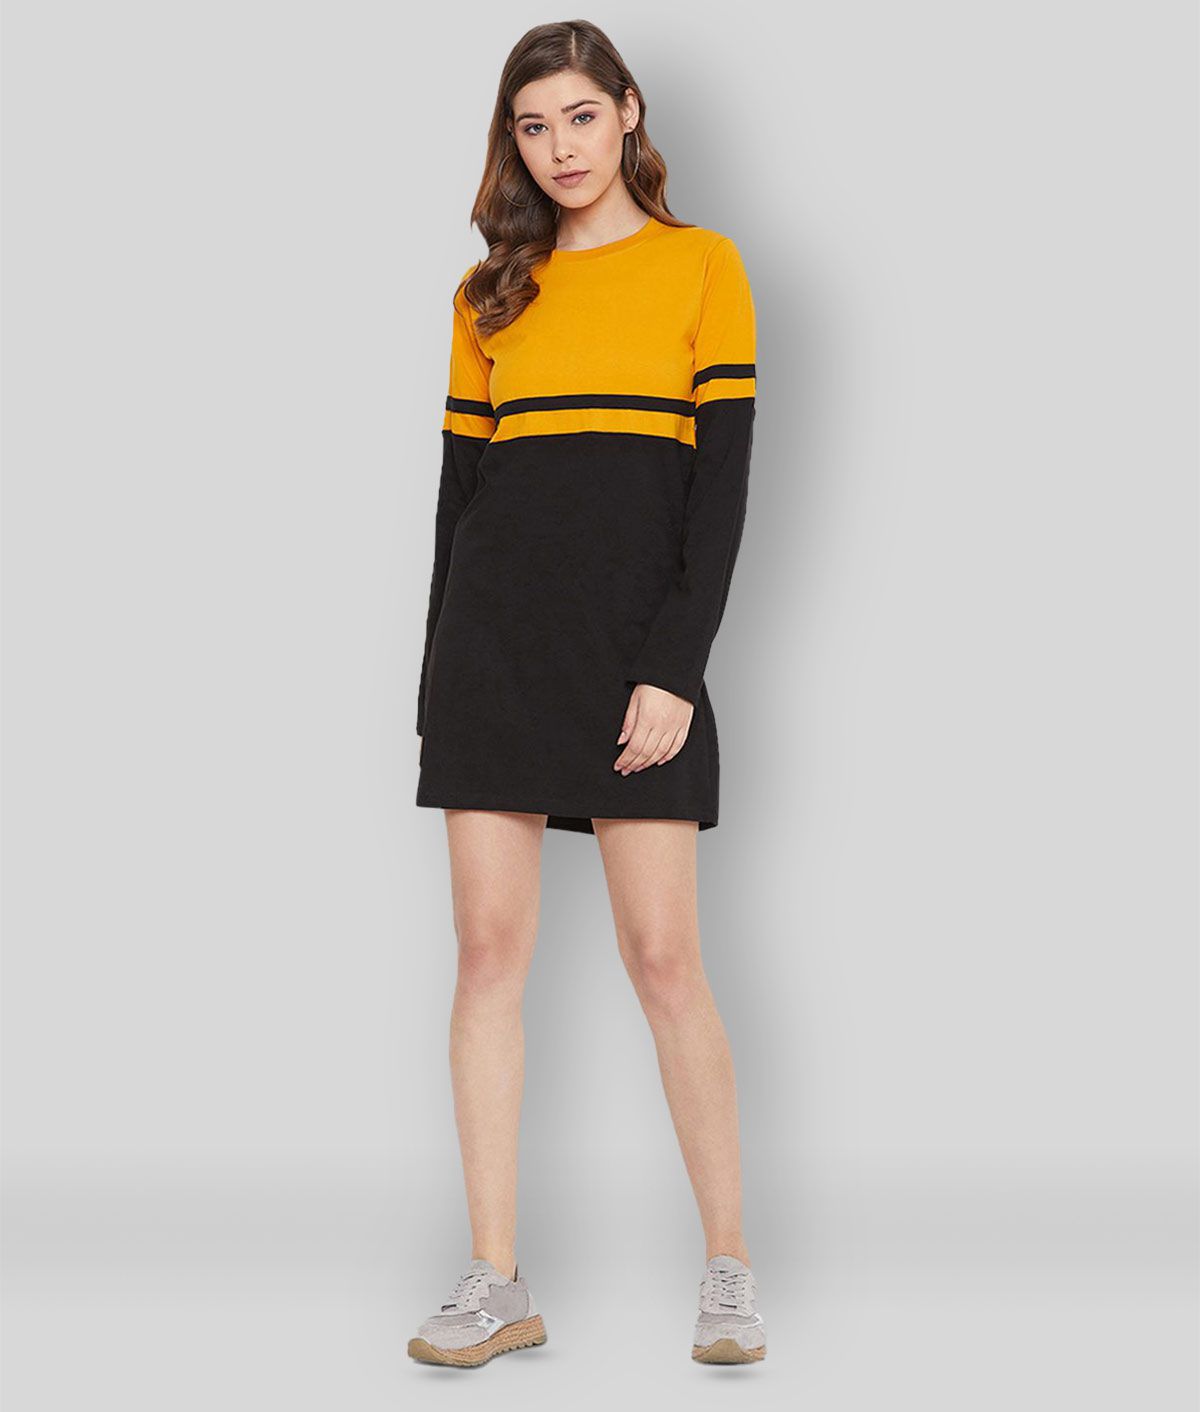 T Shirt Womens Dresses - Buy T Shirt Womens Dresses Online at Best Prices  In India